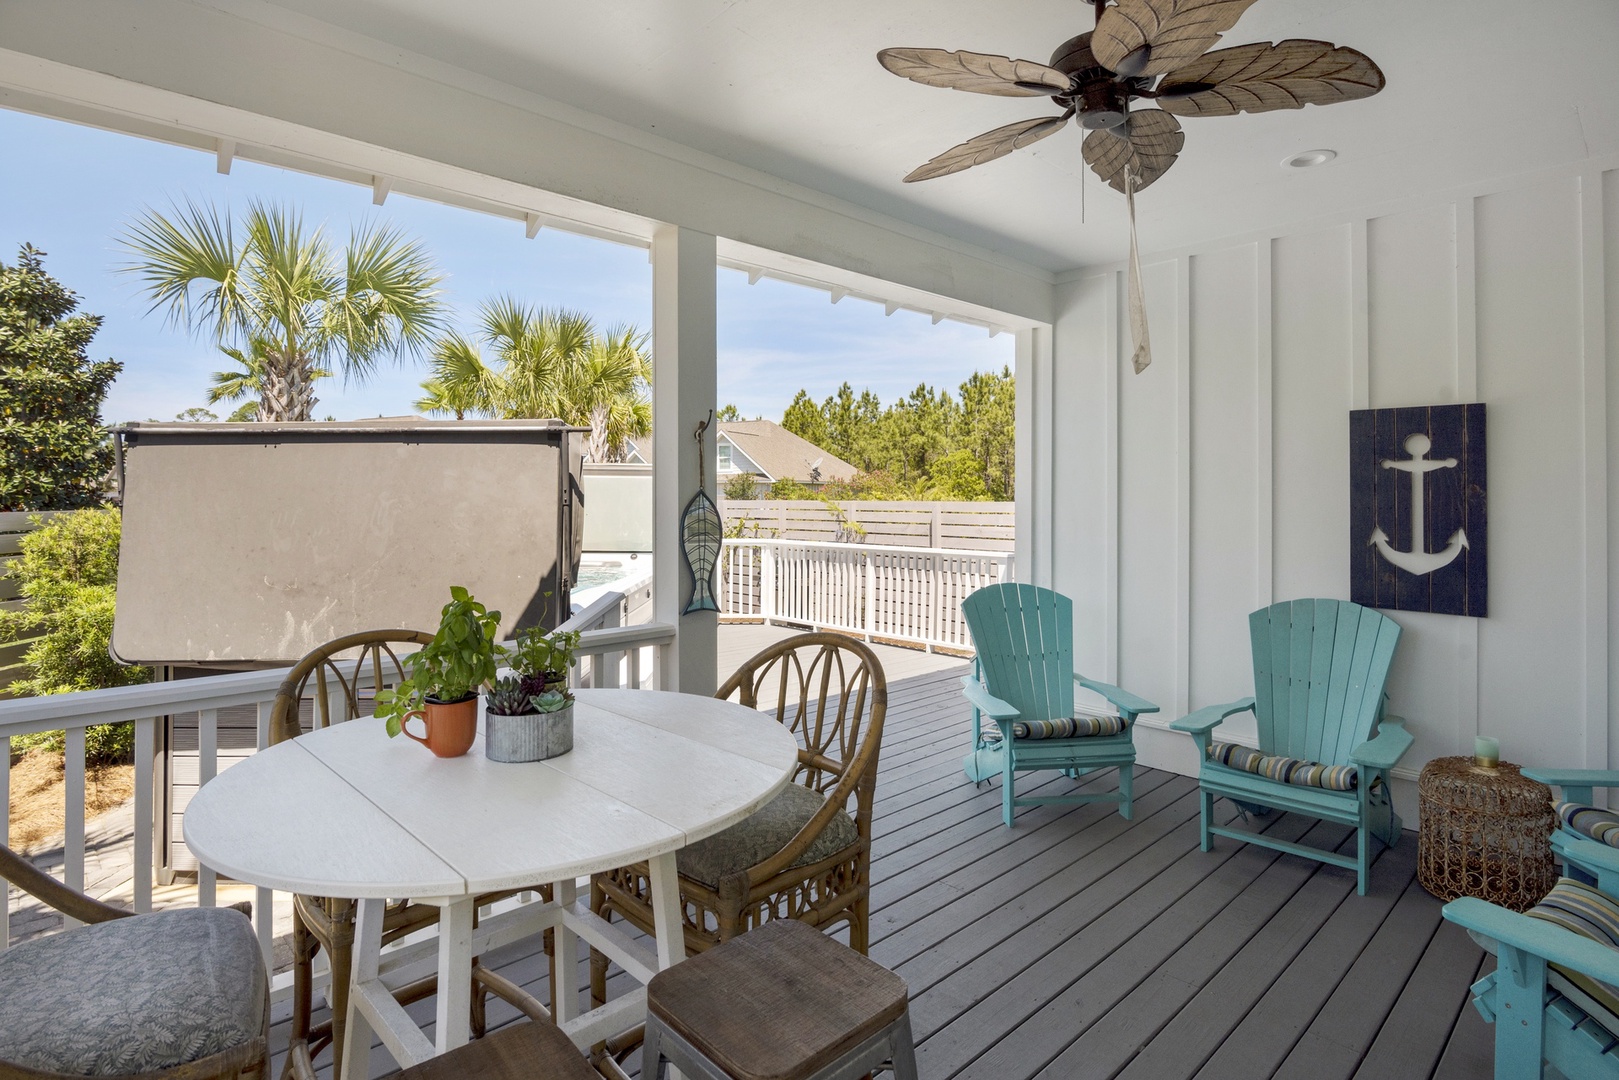 Enjoy the warm breezes and shade of the outdoor living space!